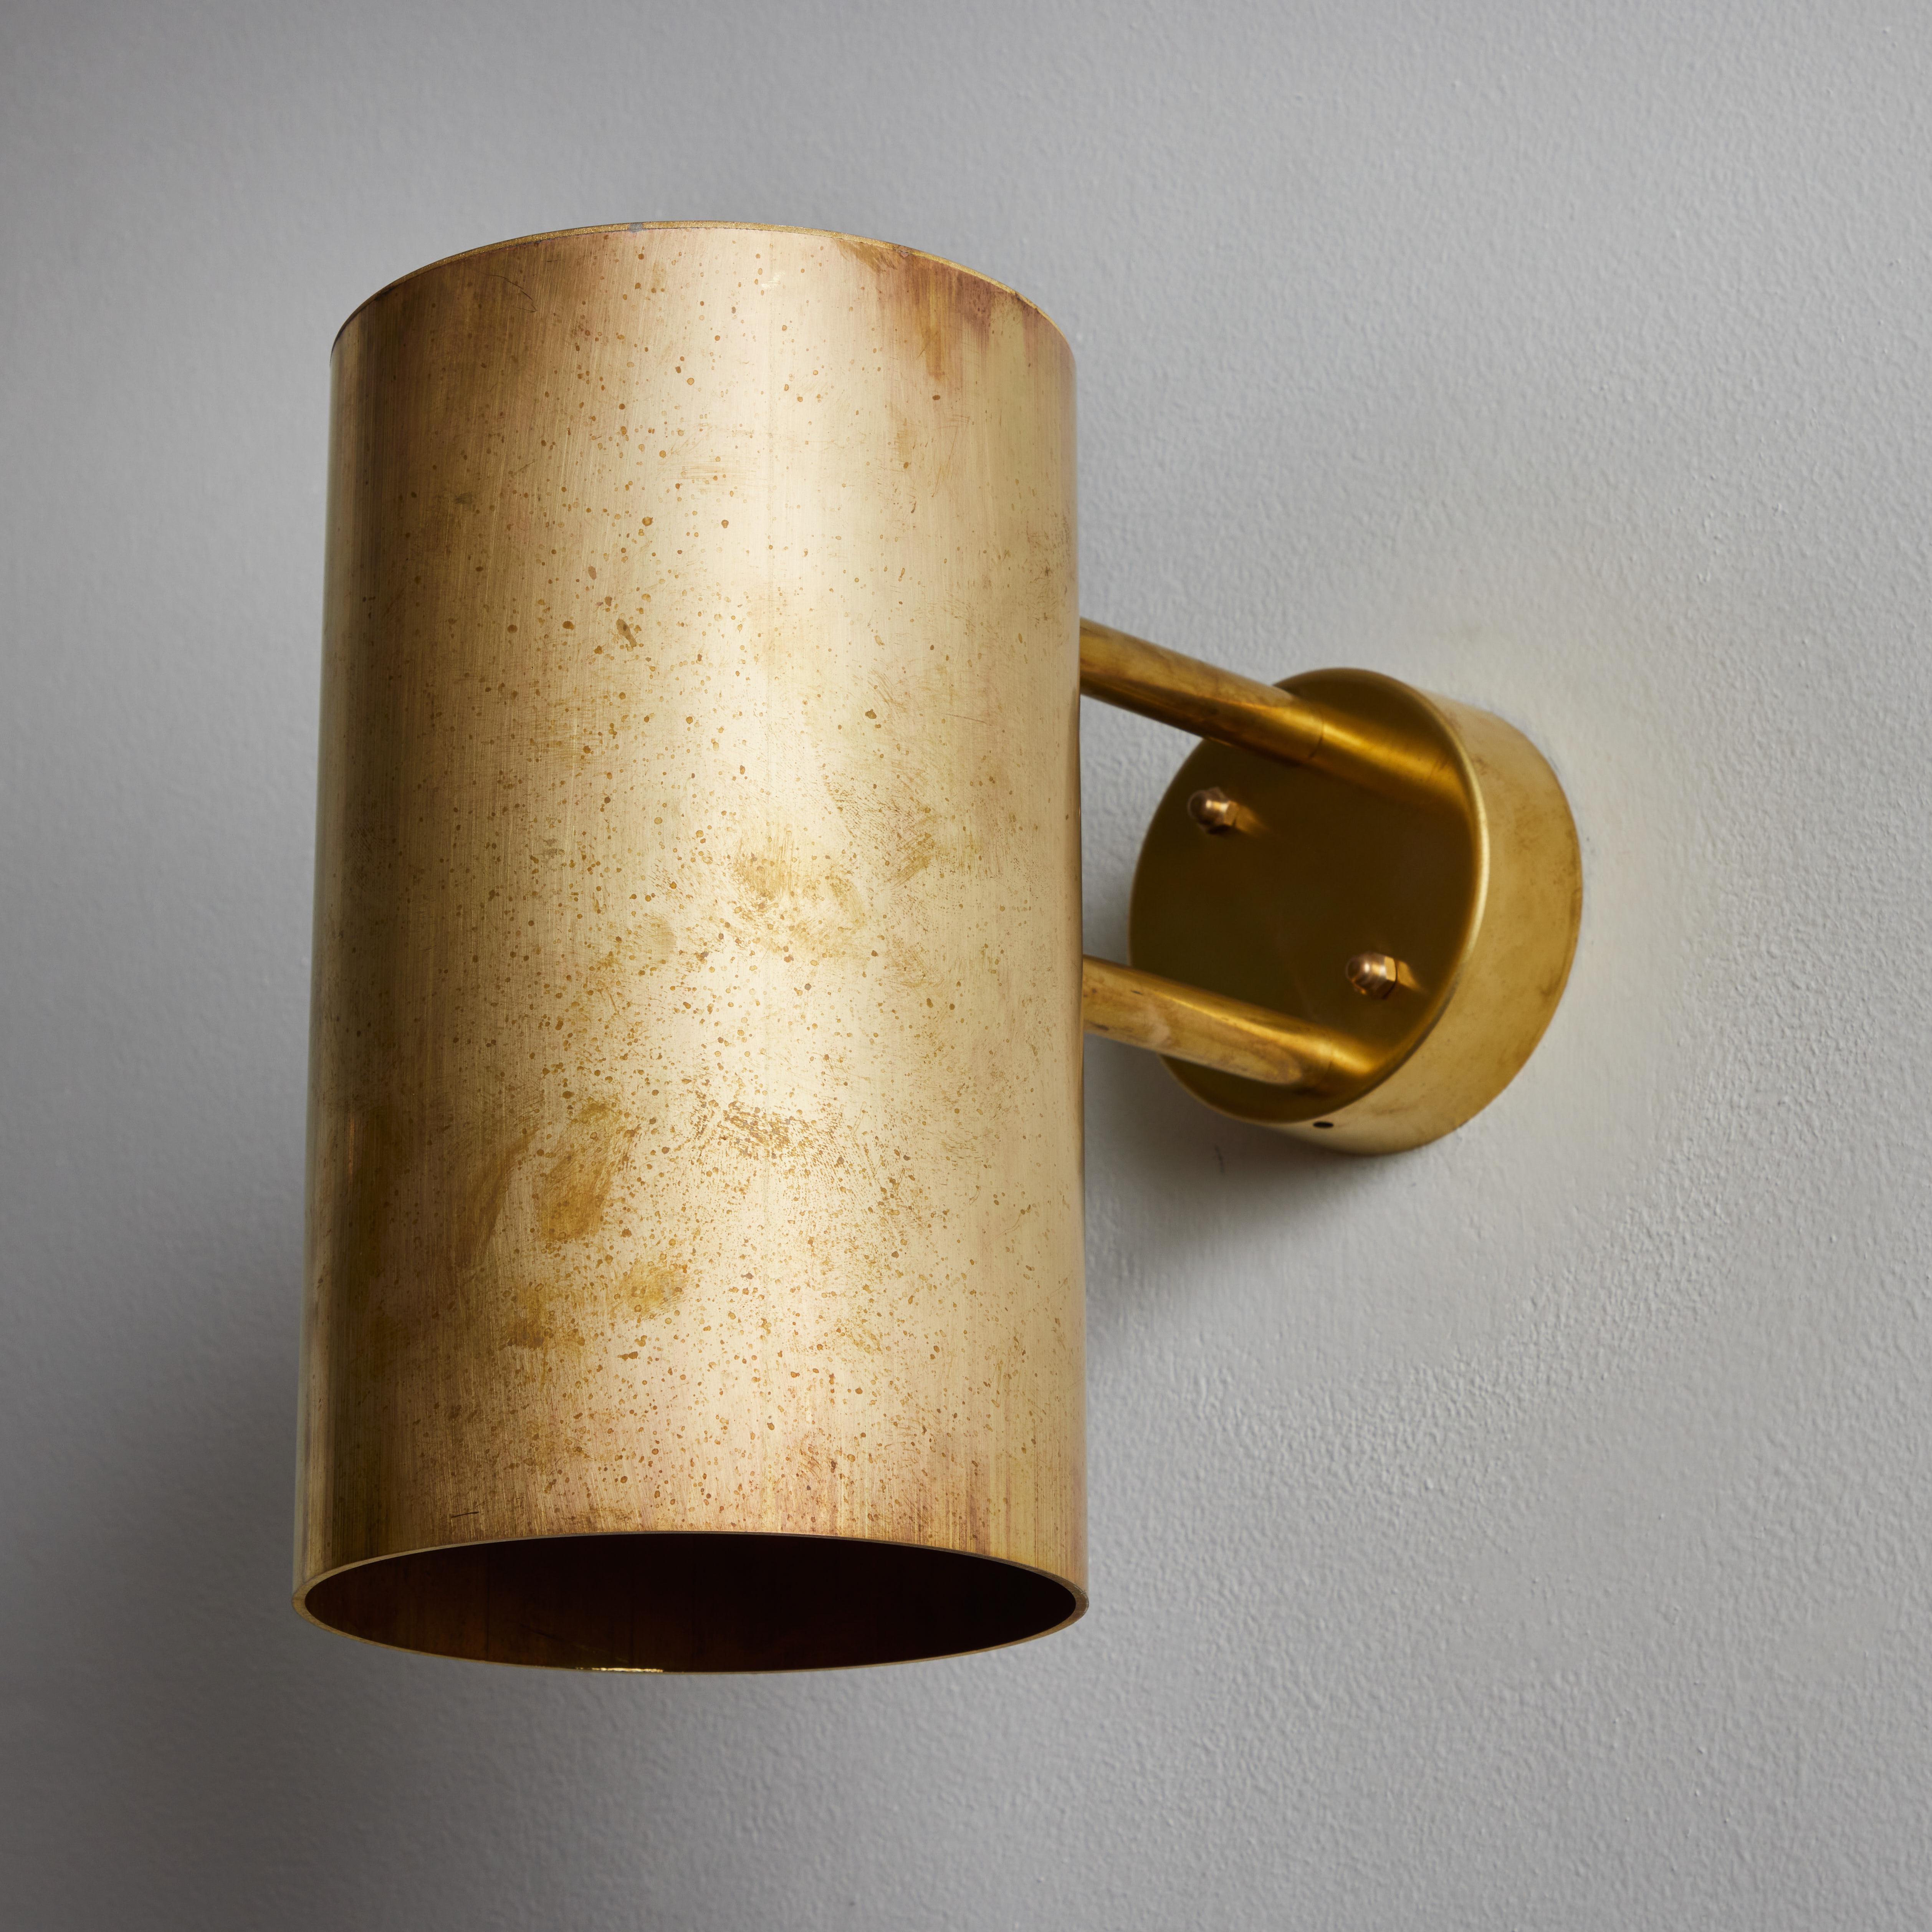 Large Hans-Agne Jakobsson C 627 'Rulle' Raw Brass Outdoor Sconce For Sale 2